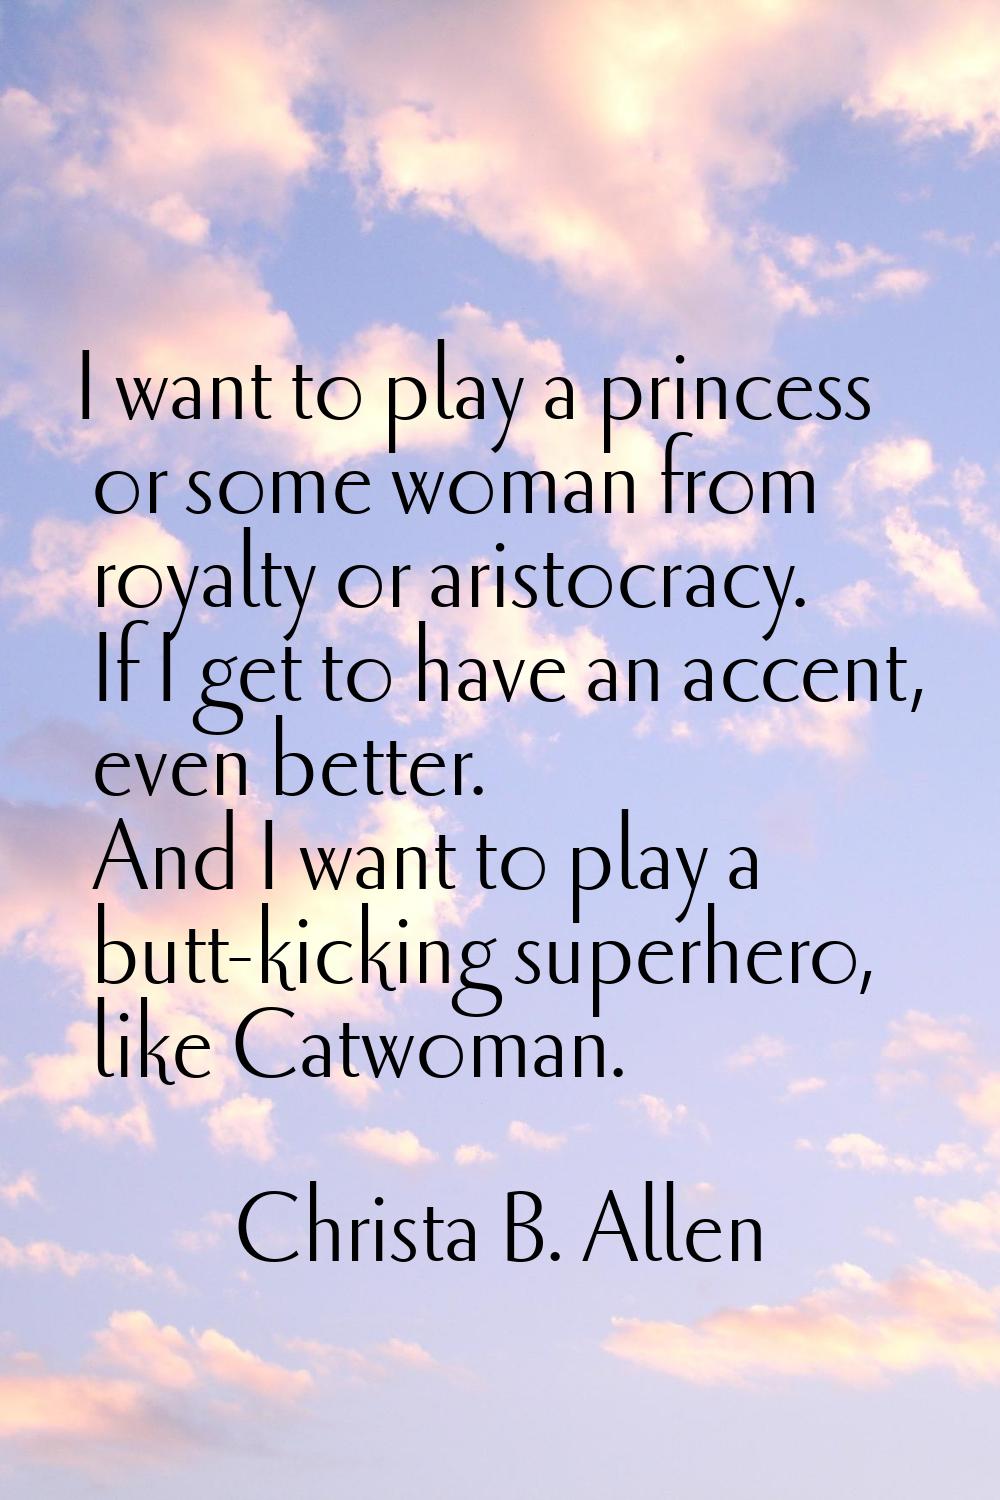 I want to play a princess or some woman from royalty or aristocracy. If I get to have an accent, ev